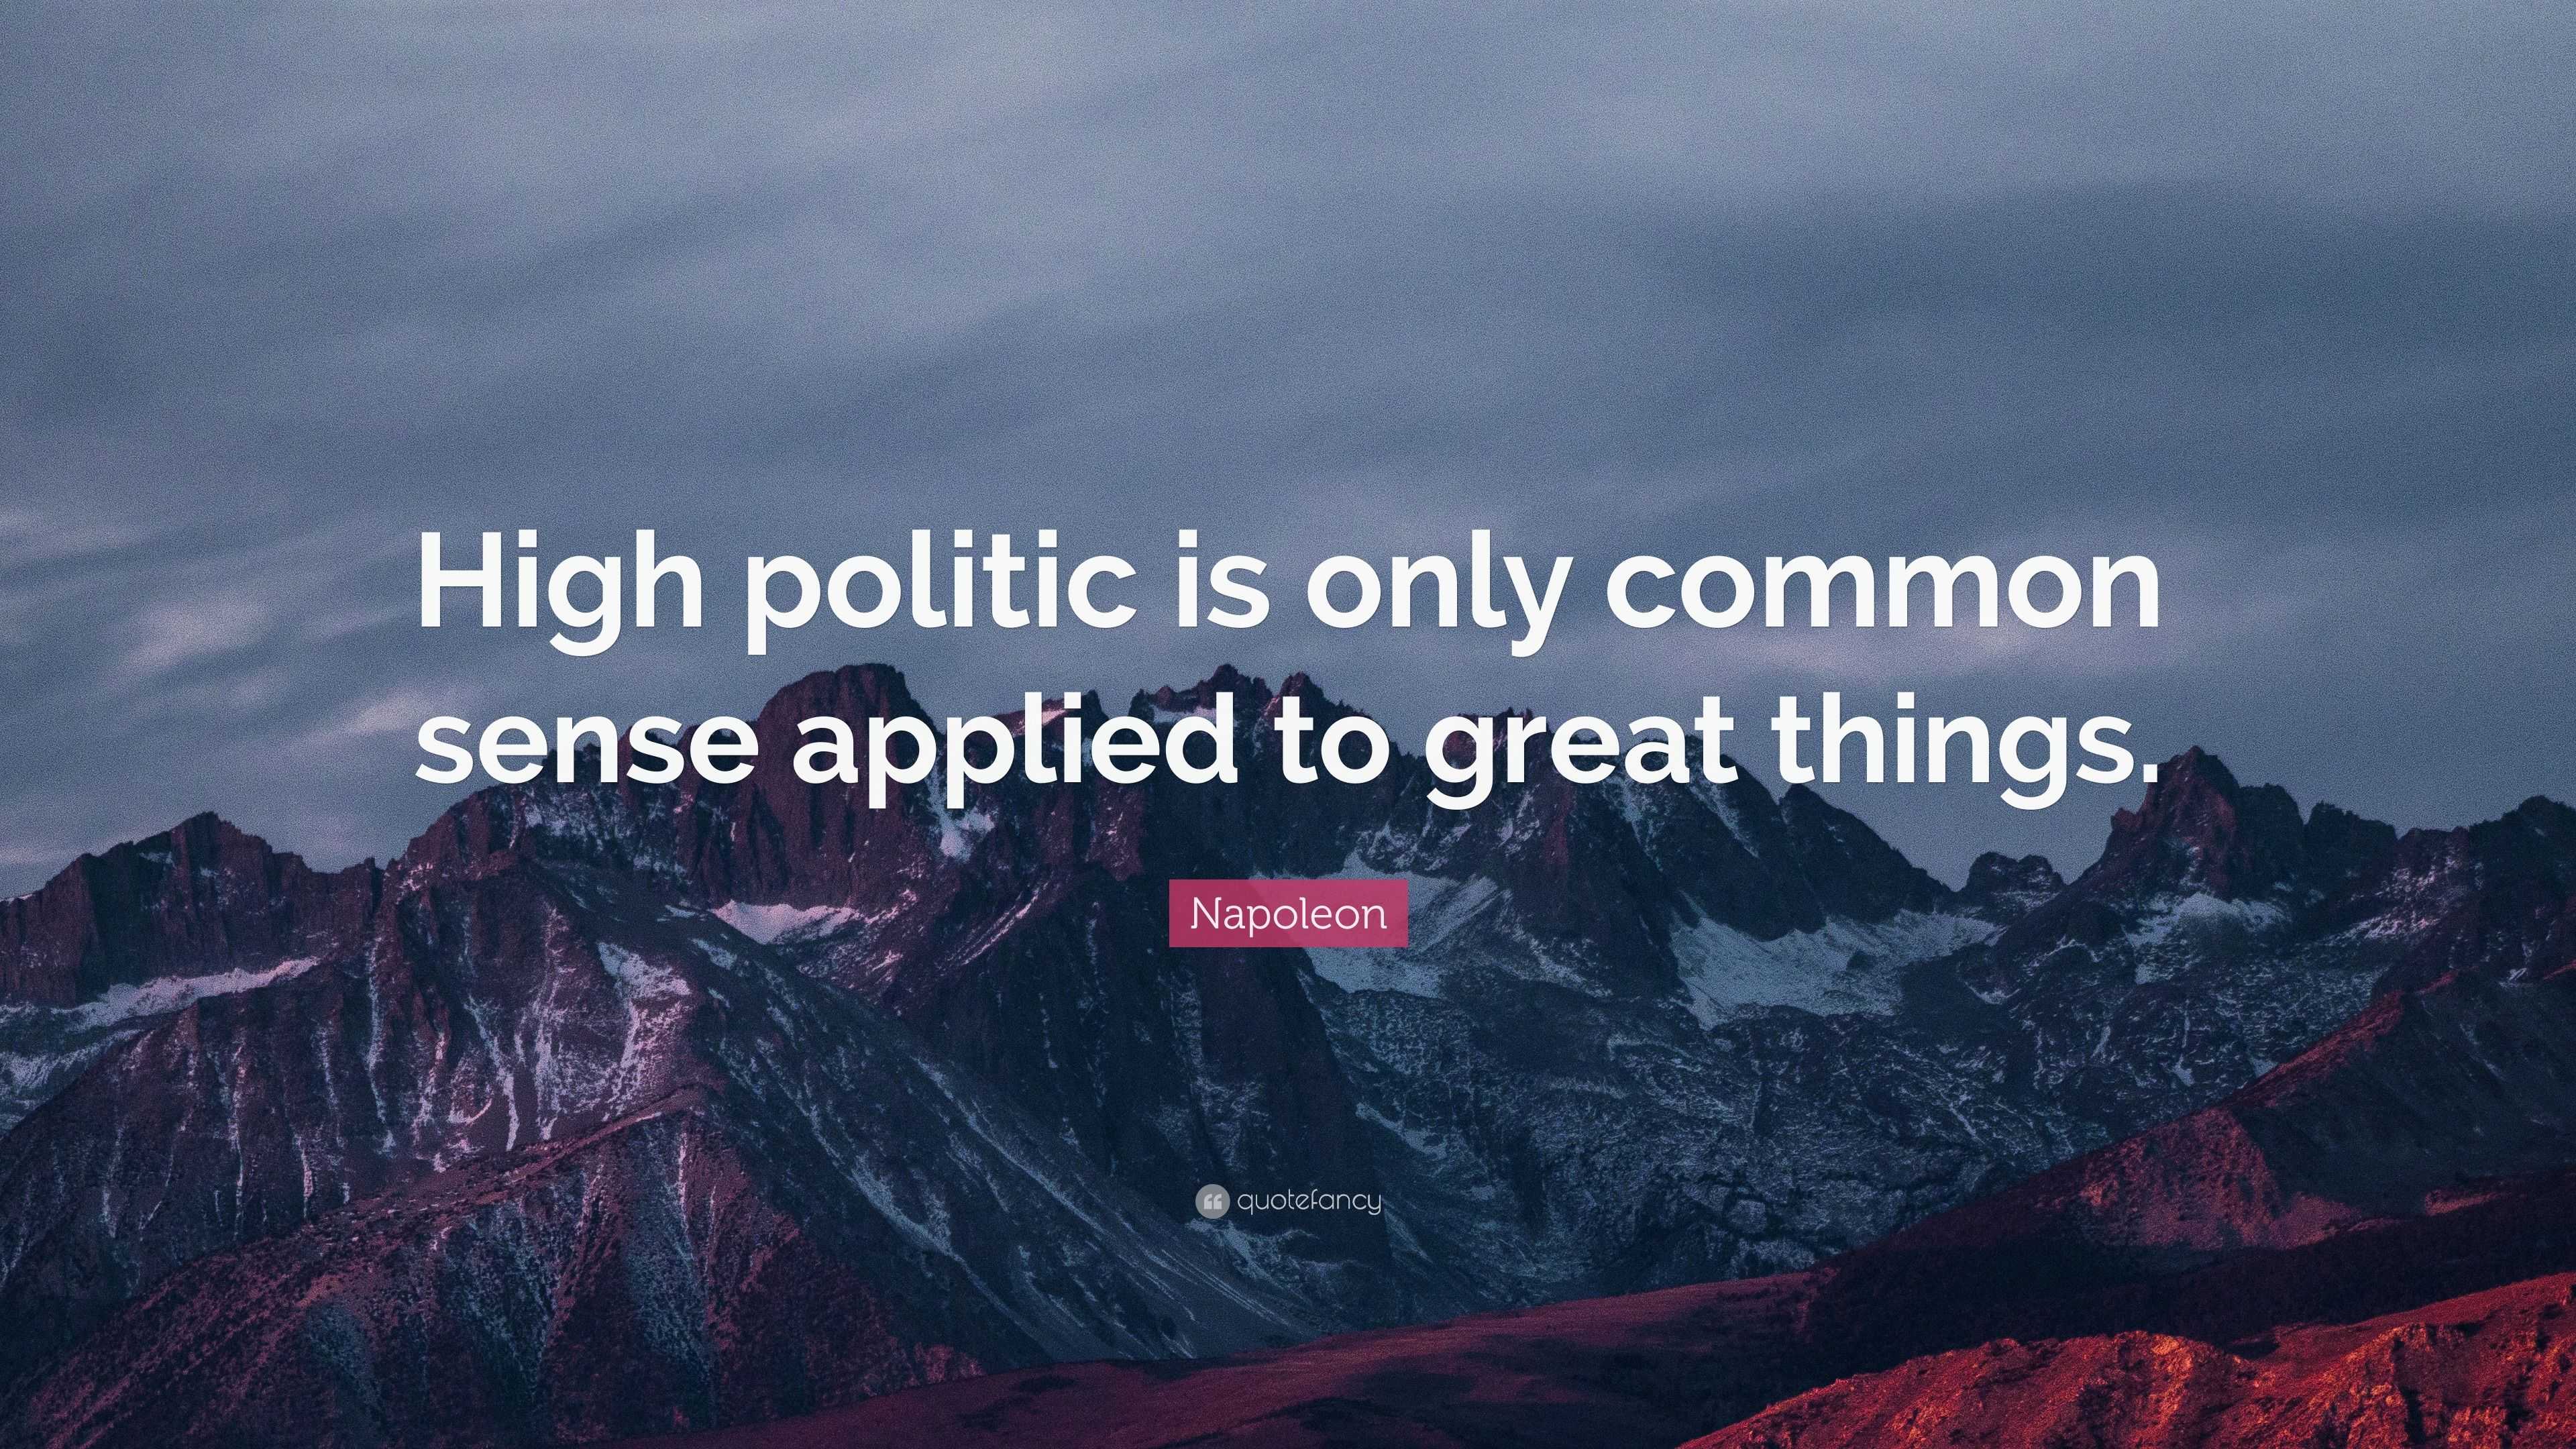 Napoleon Quote “High politic is only common sense applied to great